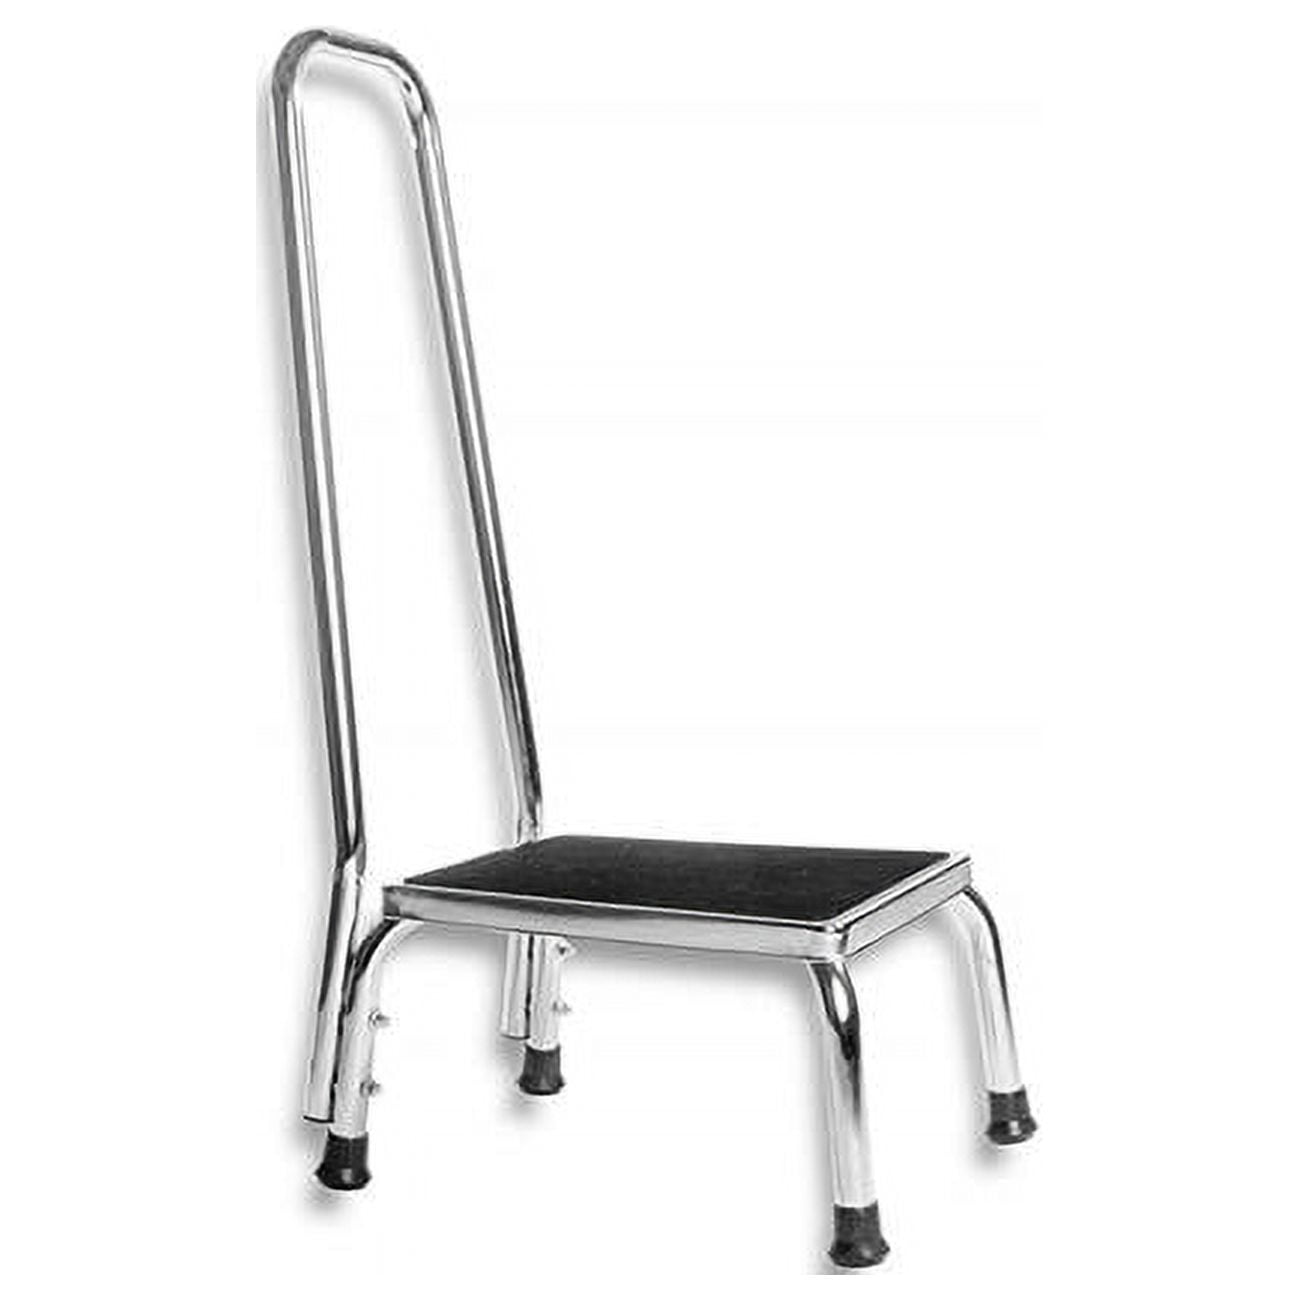 Bariatric Foot Stool With Handrail, Chrome